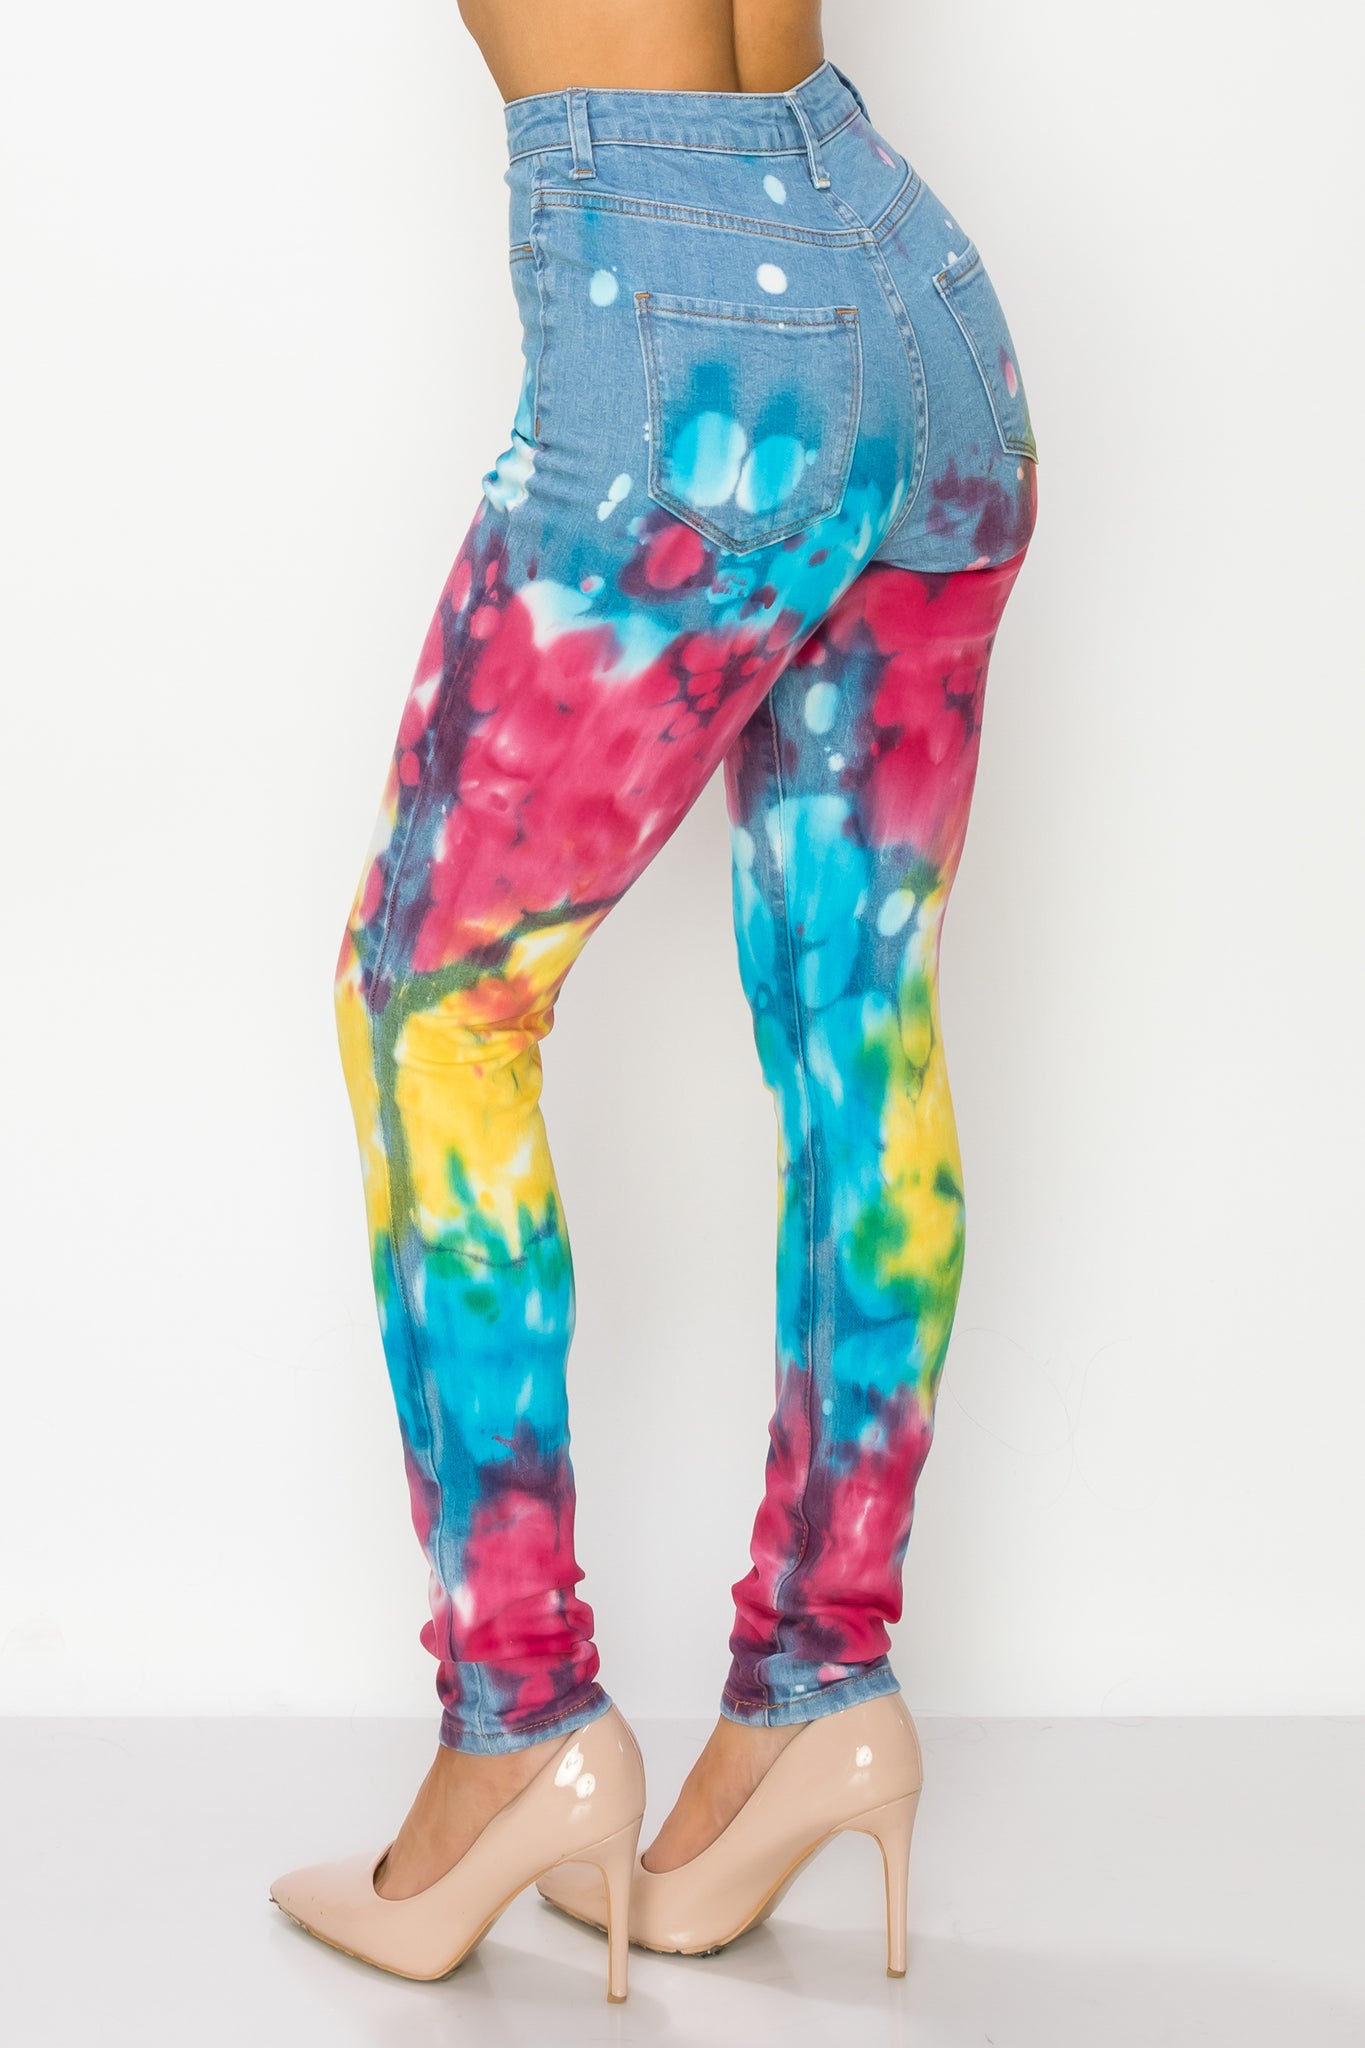 40413 Women's High rise Multi color Painted Skinny Jeans